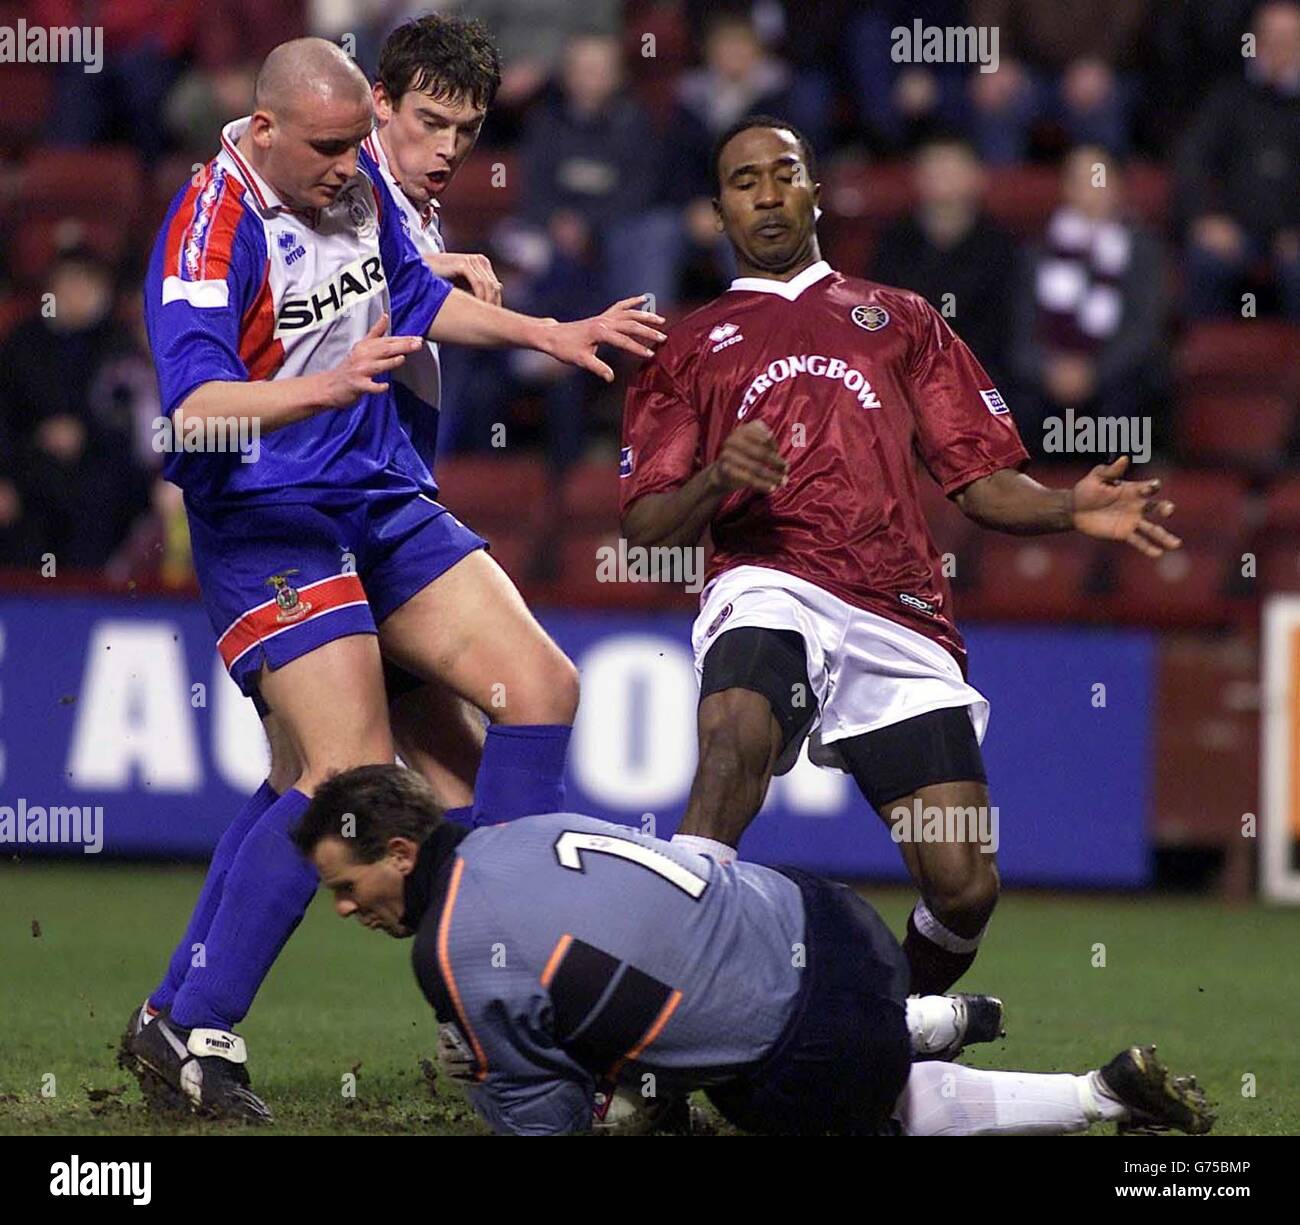 Inverness Caledonian Thistle goalkeeper Nicky Walker saves from the feet of Hearts' Ricardo Fuller, during their Tennents Scottish FA Cup 4th round match at Hearts' Tynecastle Park ground in Edinburgh. Stock Photo